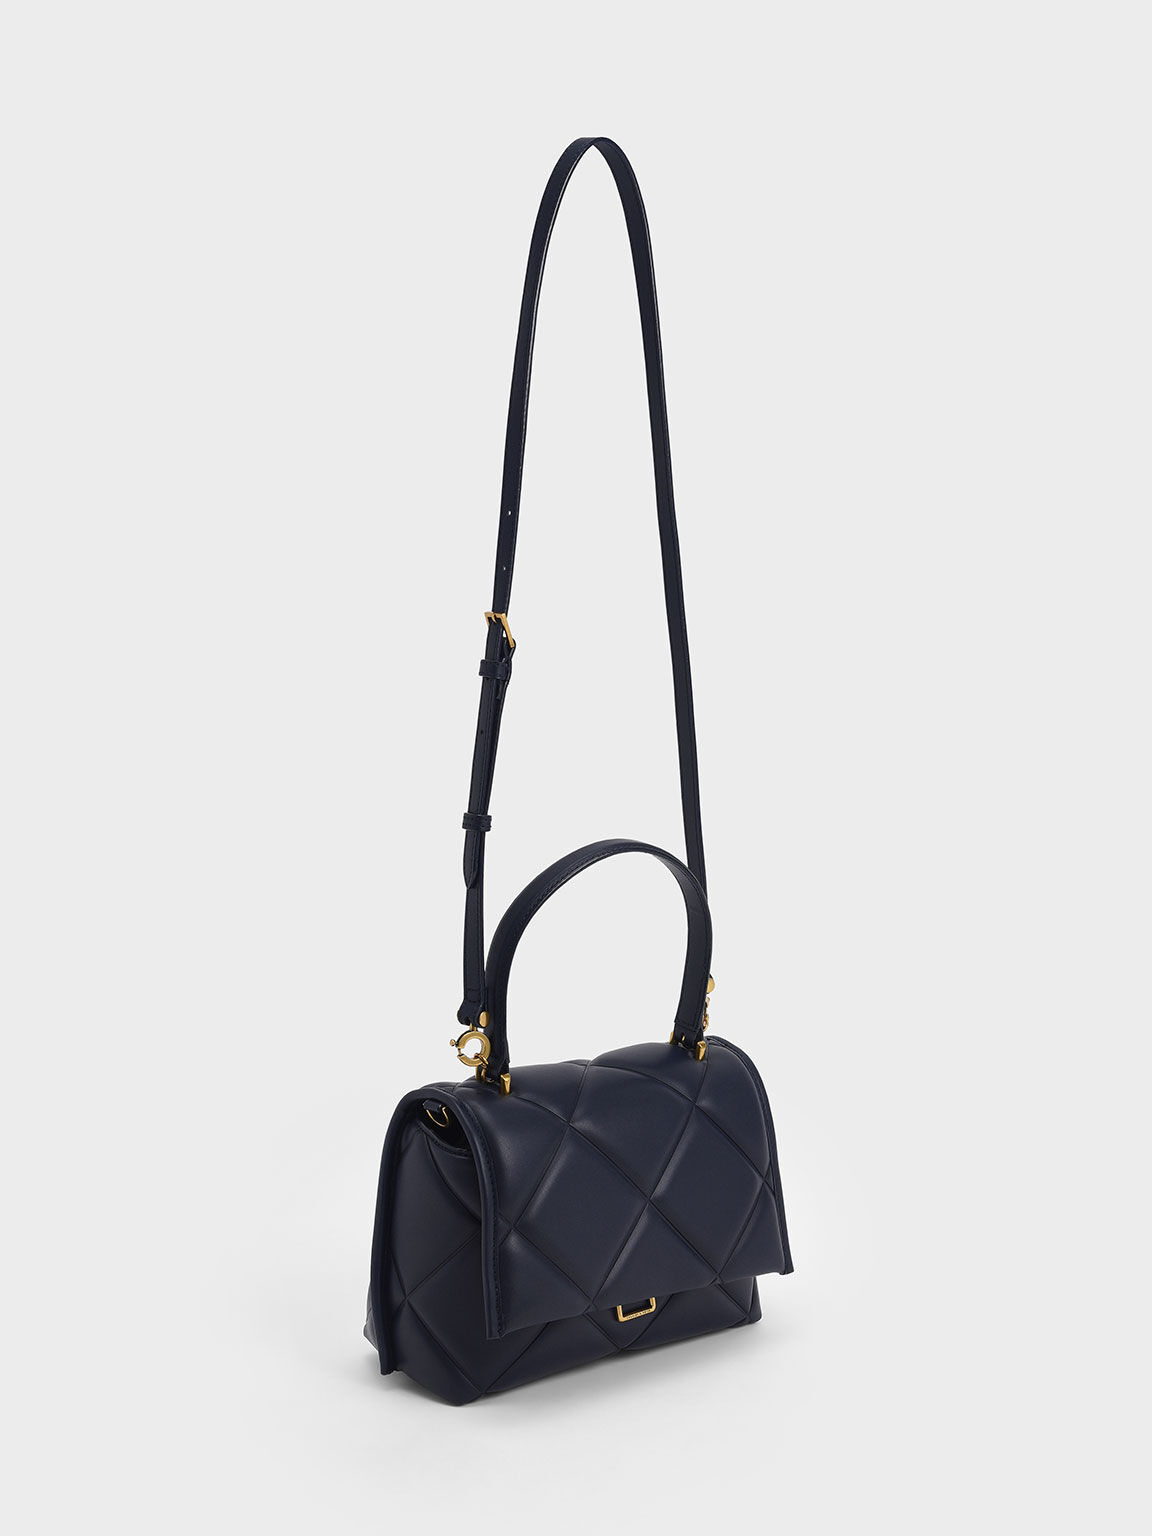 Gemma Chunky Chain Link Quilted Bag, Navy, hi-res